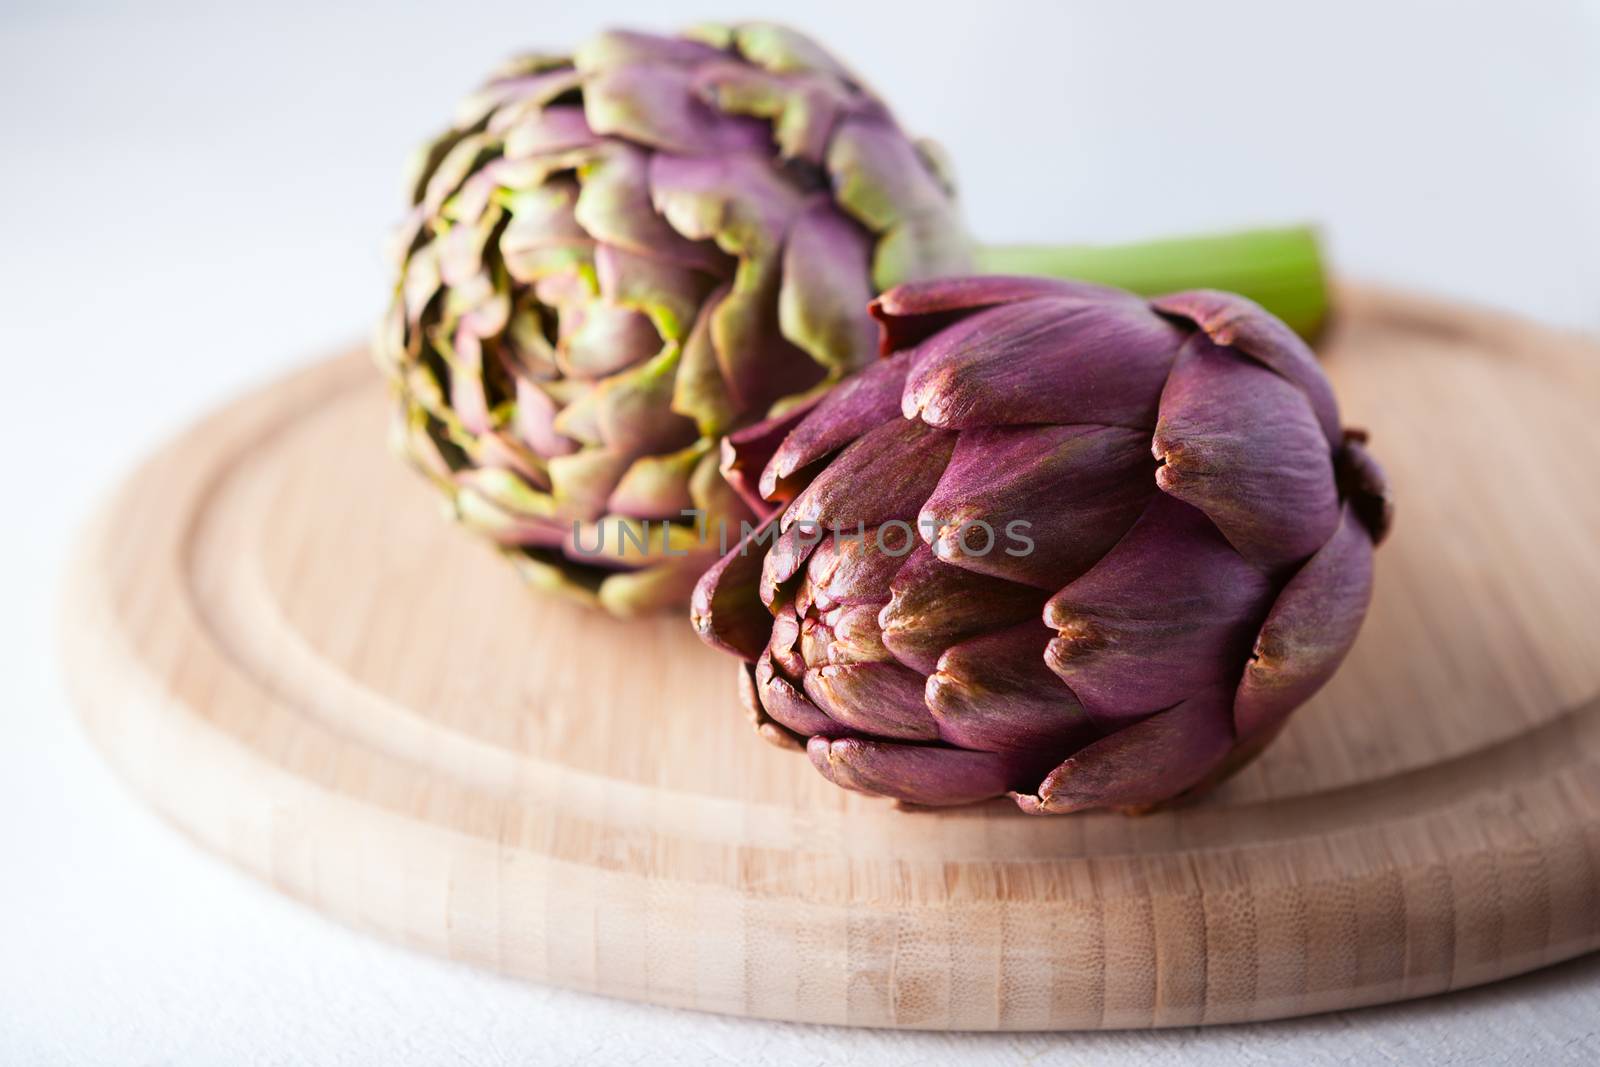 Two artichokes lying on a wooden plate.